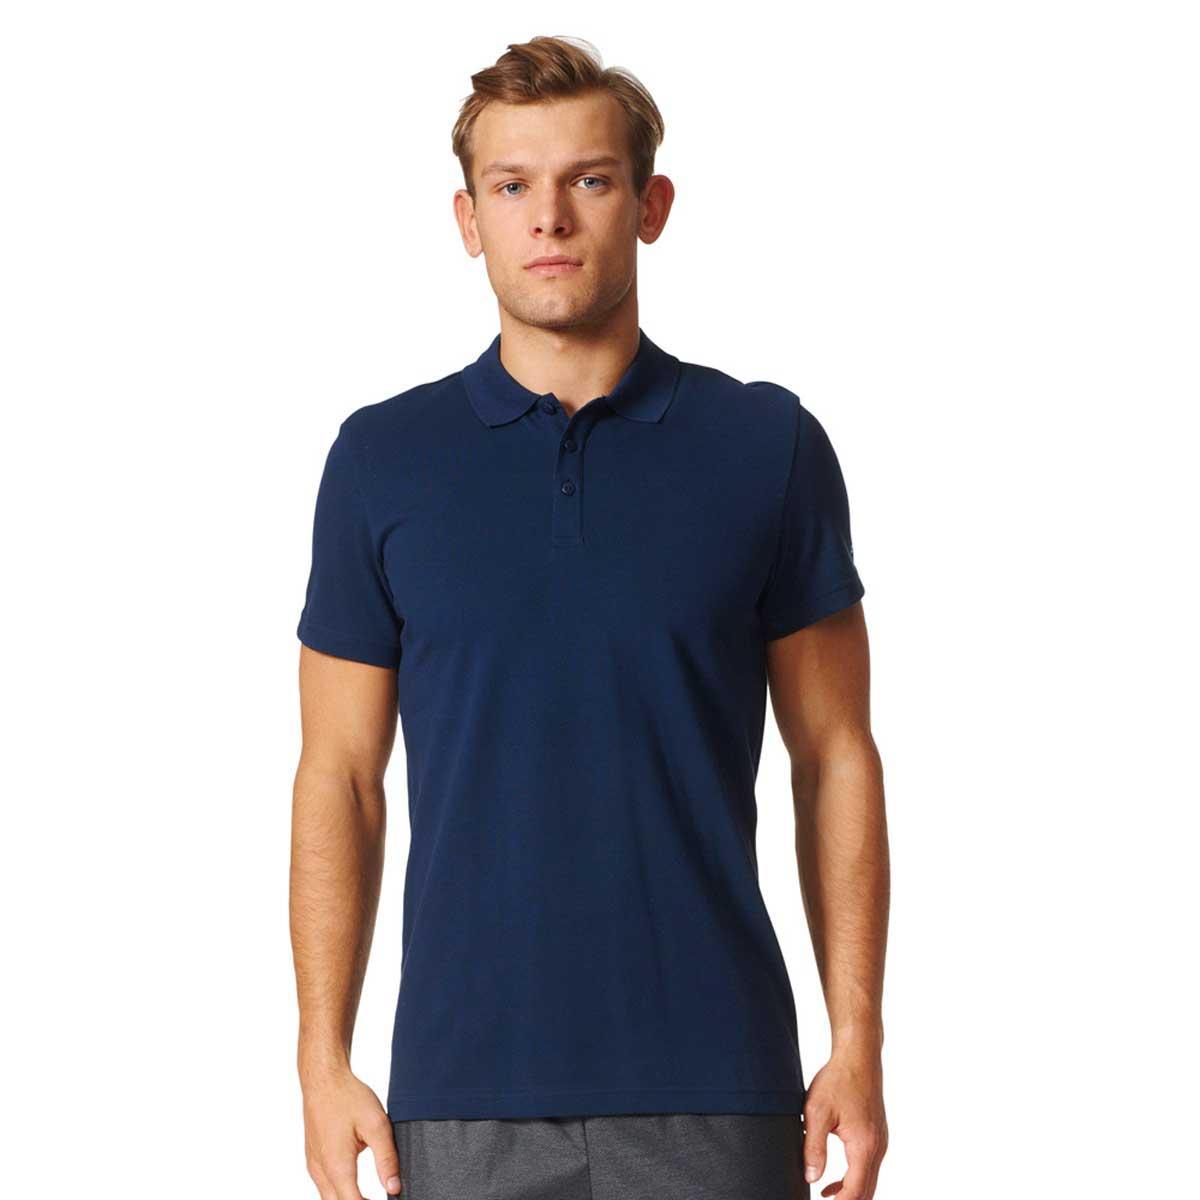 Buy Adidas Mens Essential Base Polo T-Shirts Online at Lowest Price in ...